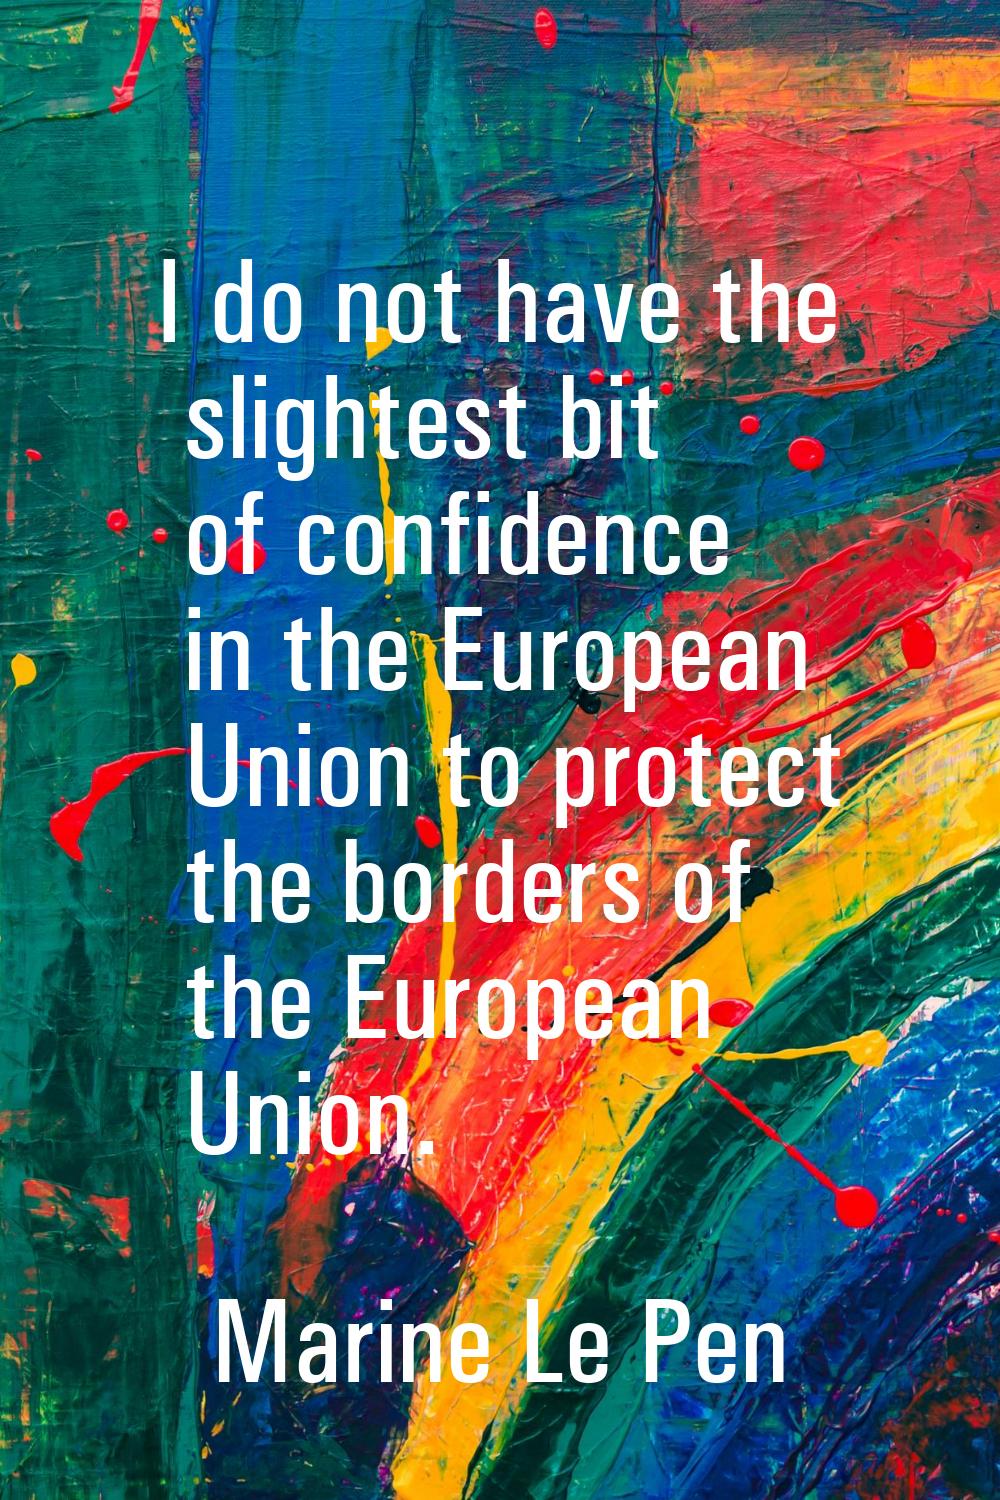 I do not have the slightest bit of confidence in the European Union to protect the borders of the E